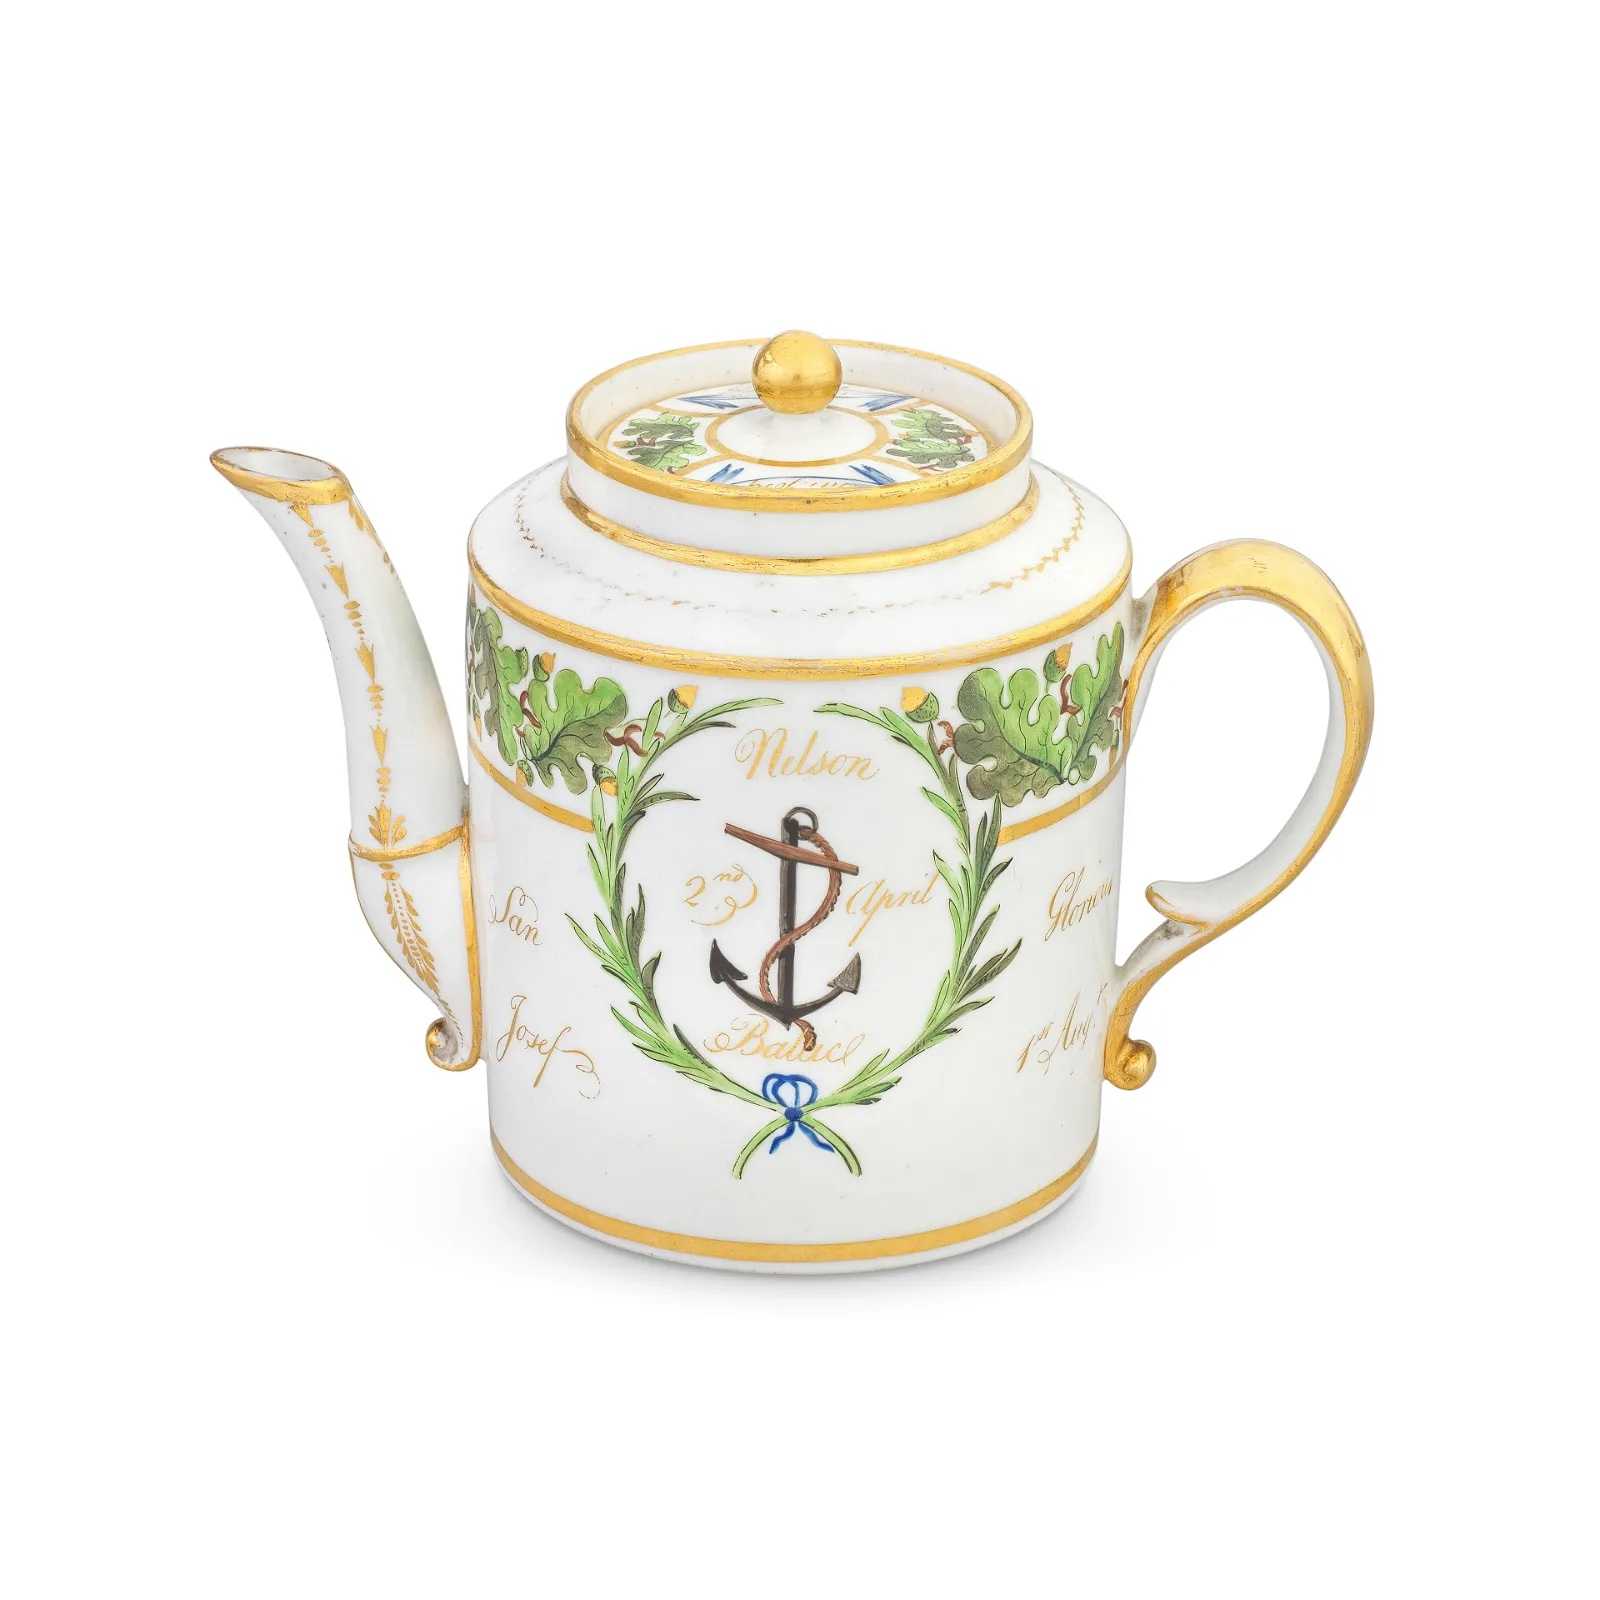 A London-decorated Paris porcelain teapot and cover from the Baltic service, estimated at £20,000-£30,000 ($25,125-$37,690) at Bonhams.